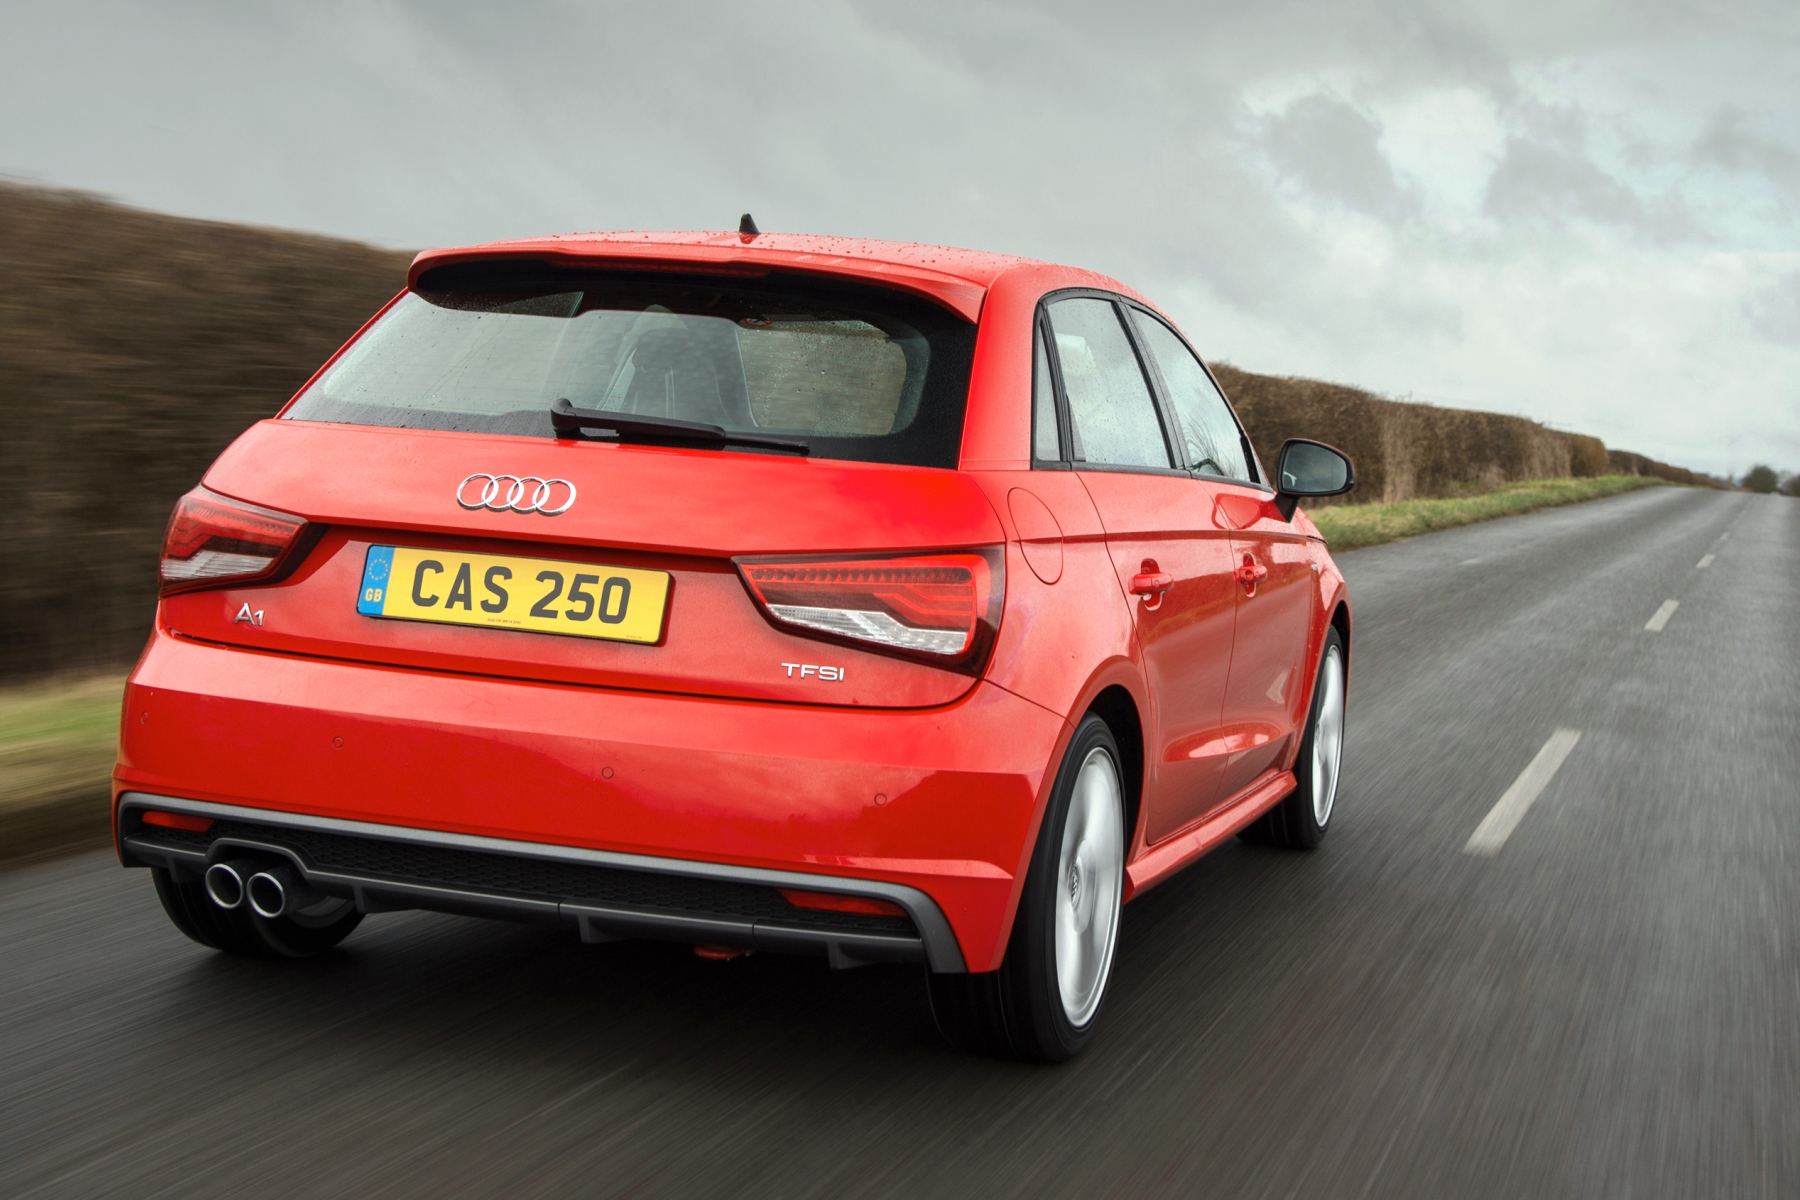 A Luxurious And Sporty Ride: The 2012 Audi A1 Sportback